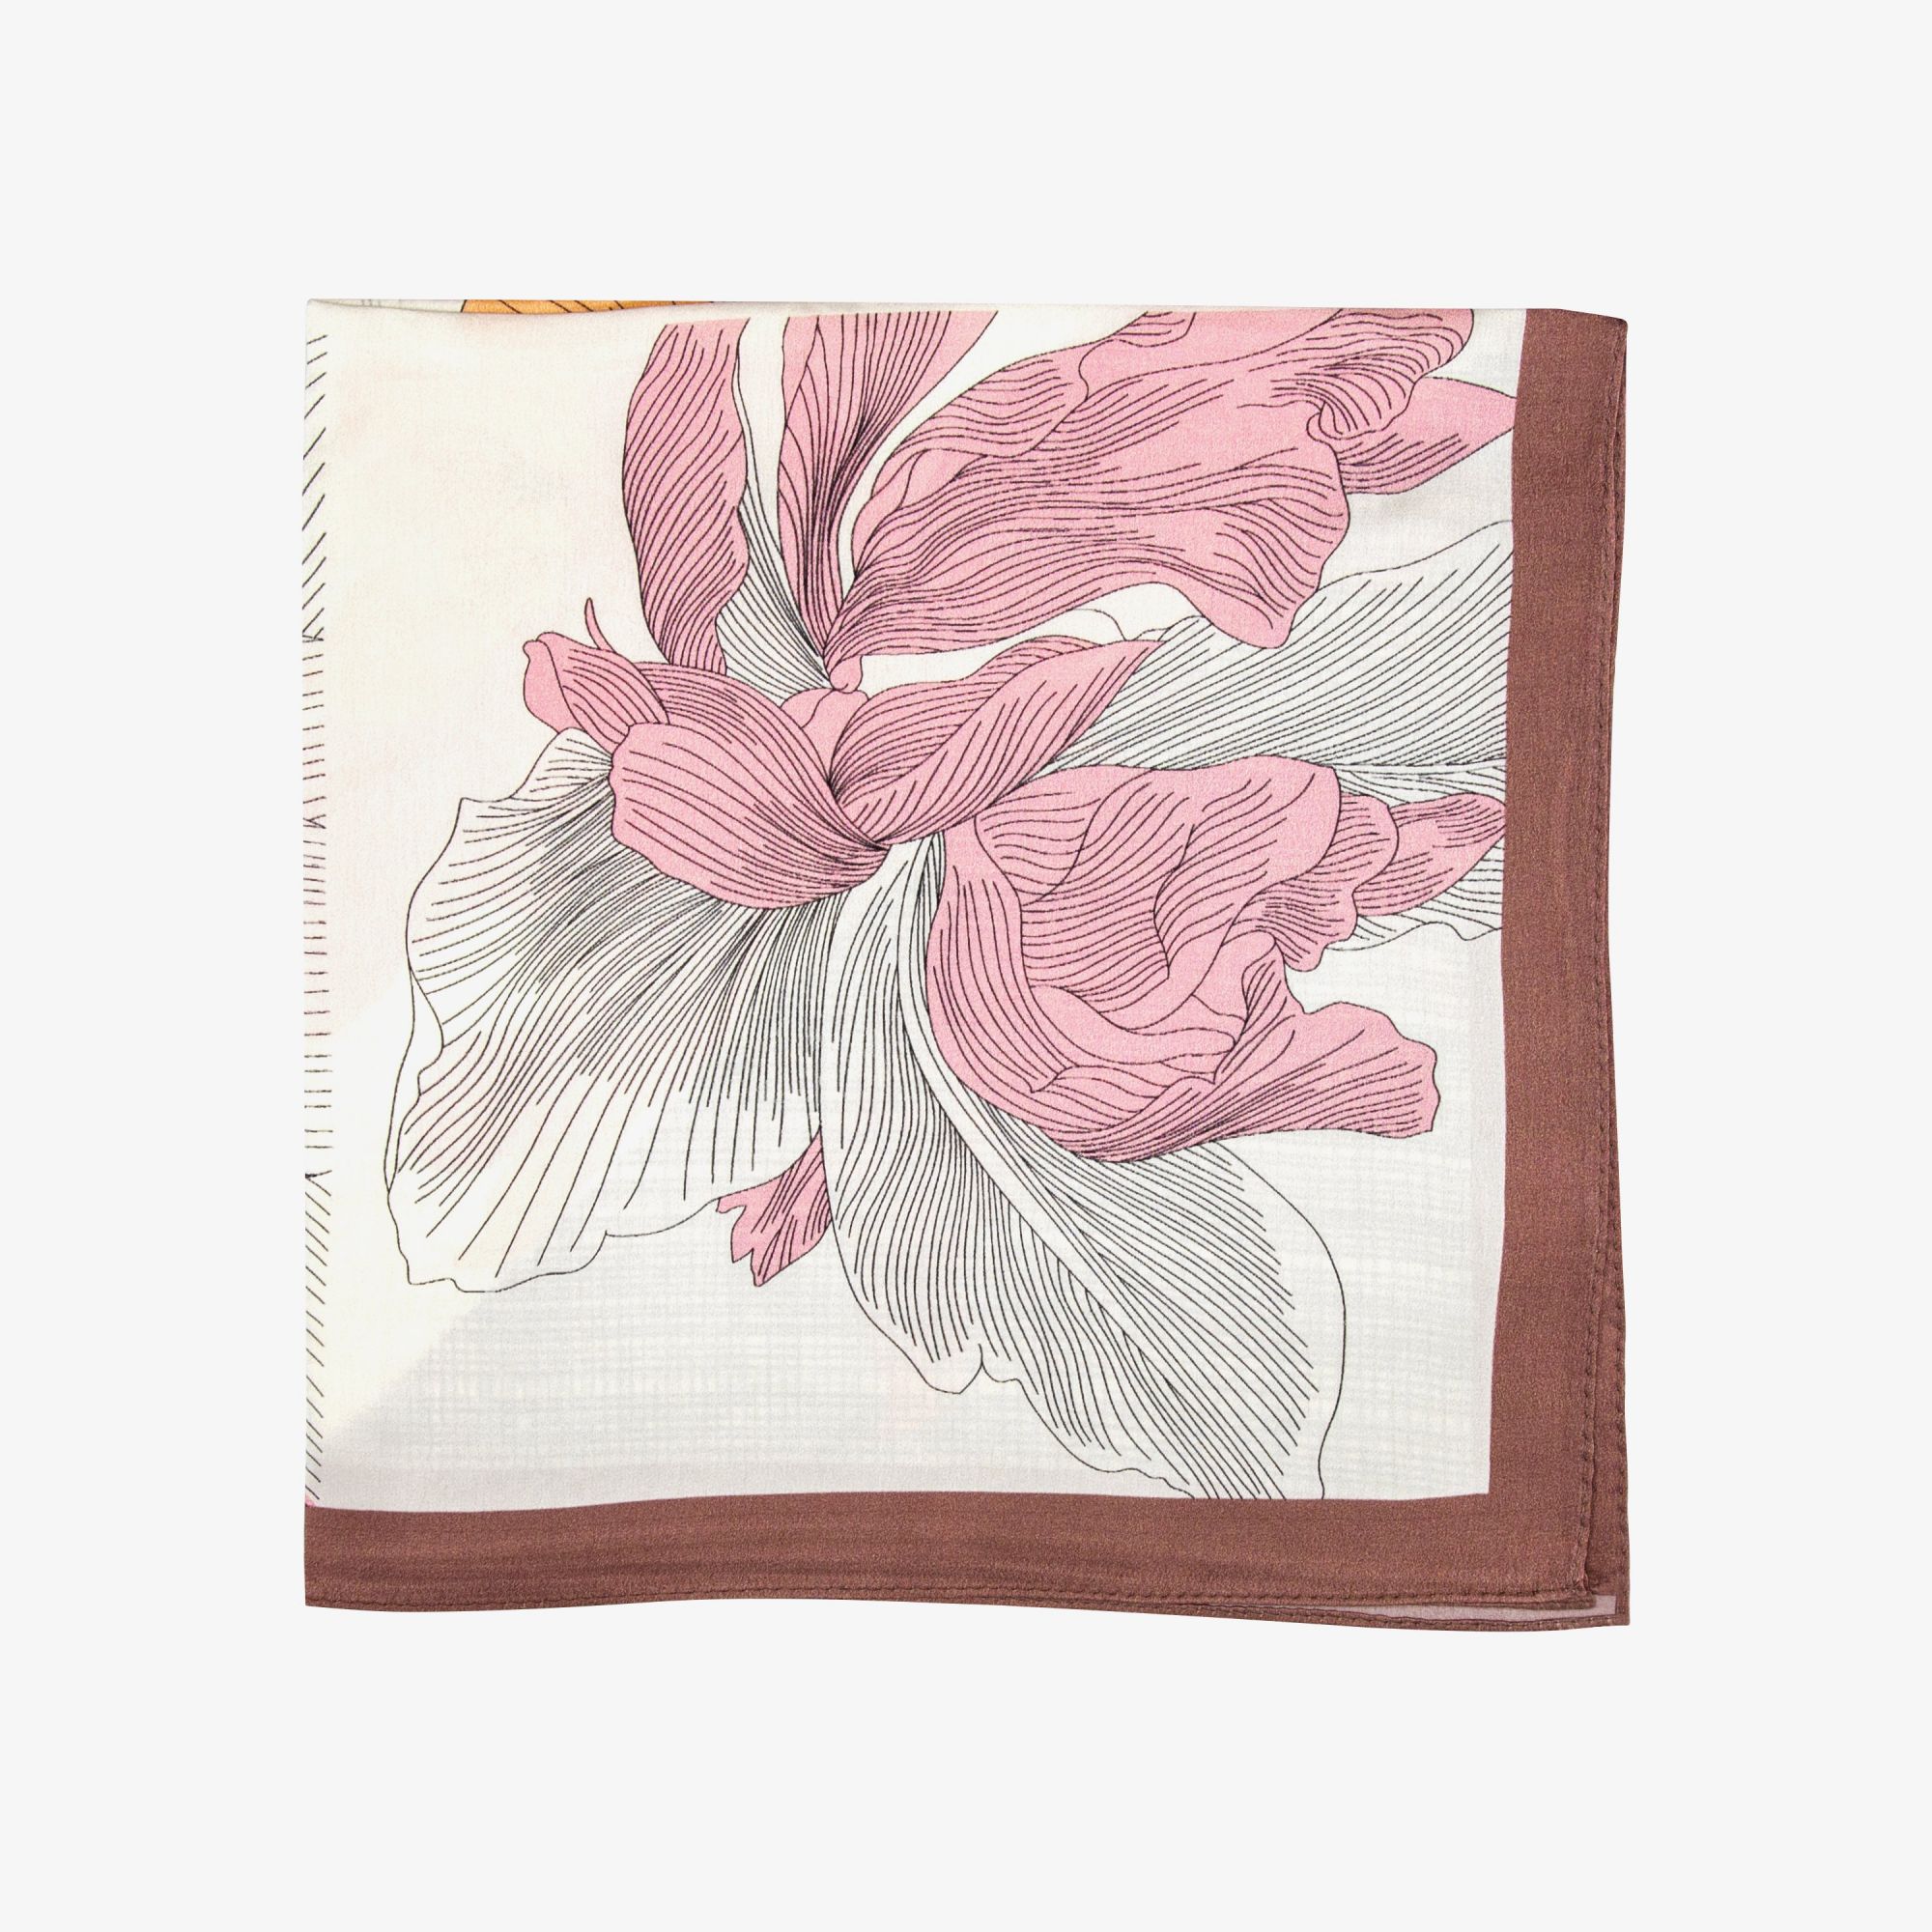 LEEZ Floral Drawing Square Silk Scarf